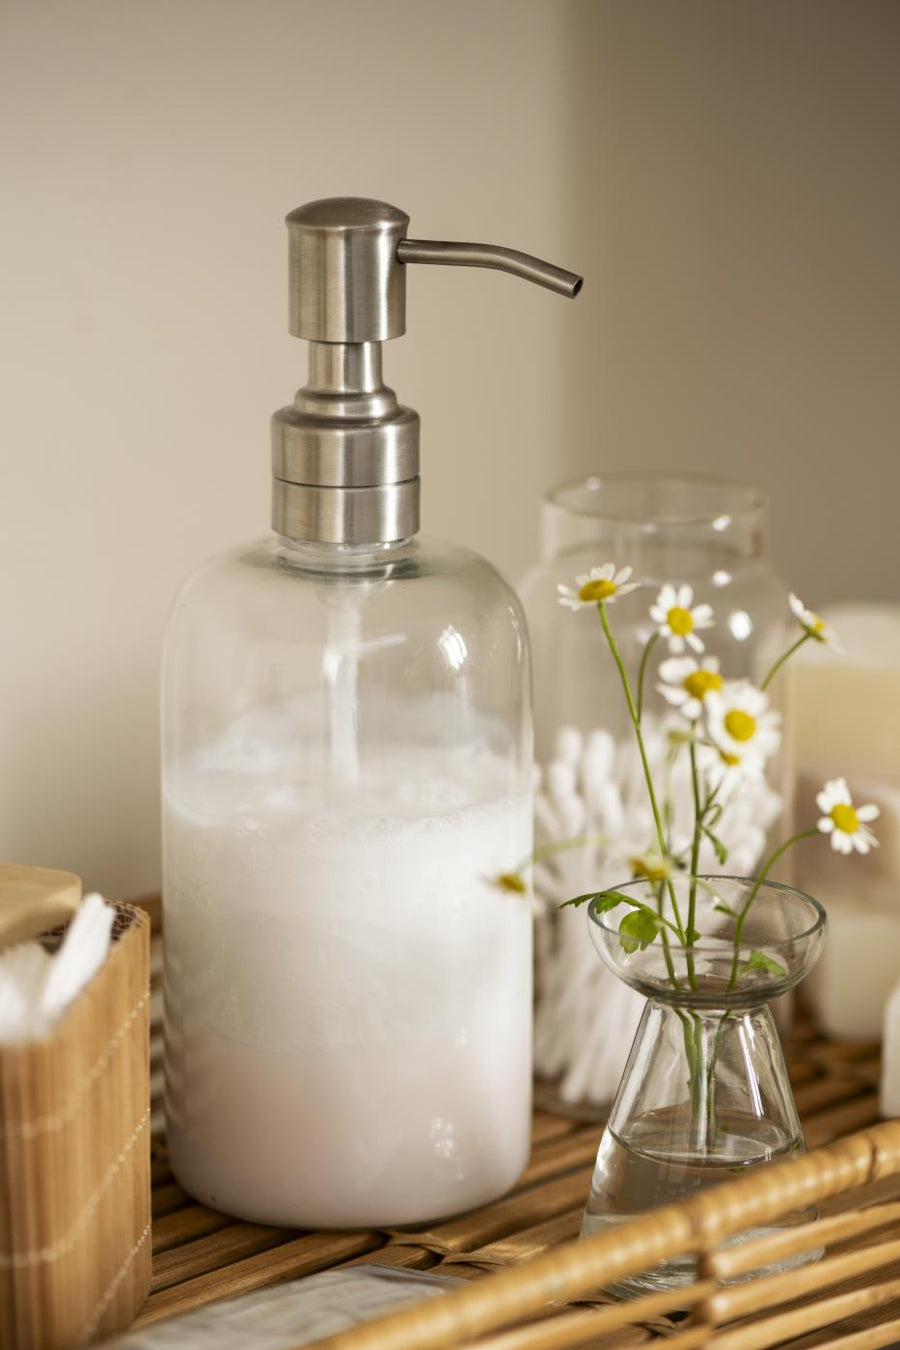 GLASS DISPENSER WITH SILVER COLOURED STAINLESS PUMP